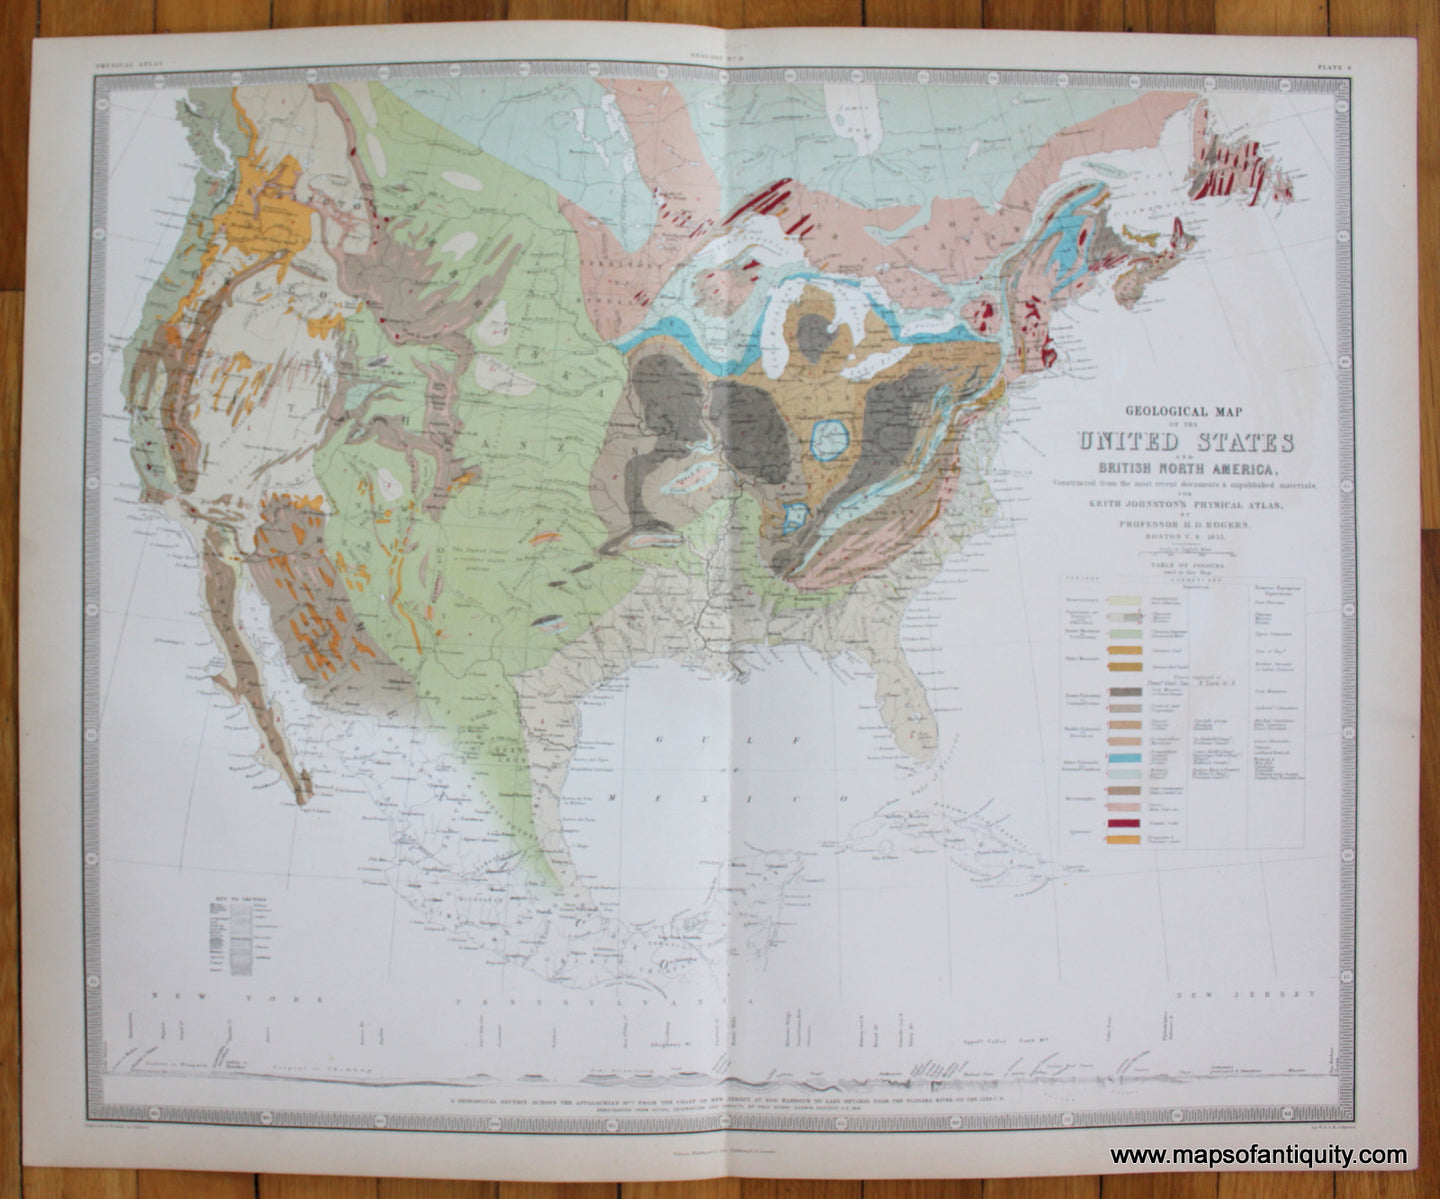 Geological-Map-United-States-USA-US-British-North-America-Canada-Geology-Johnston-1856-Antique-Map-1850s-1800s